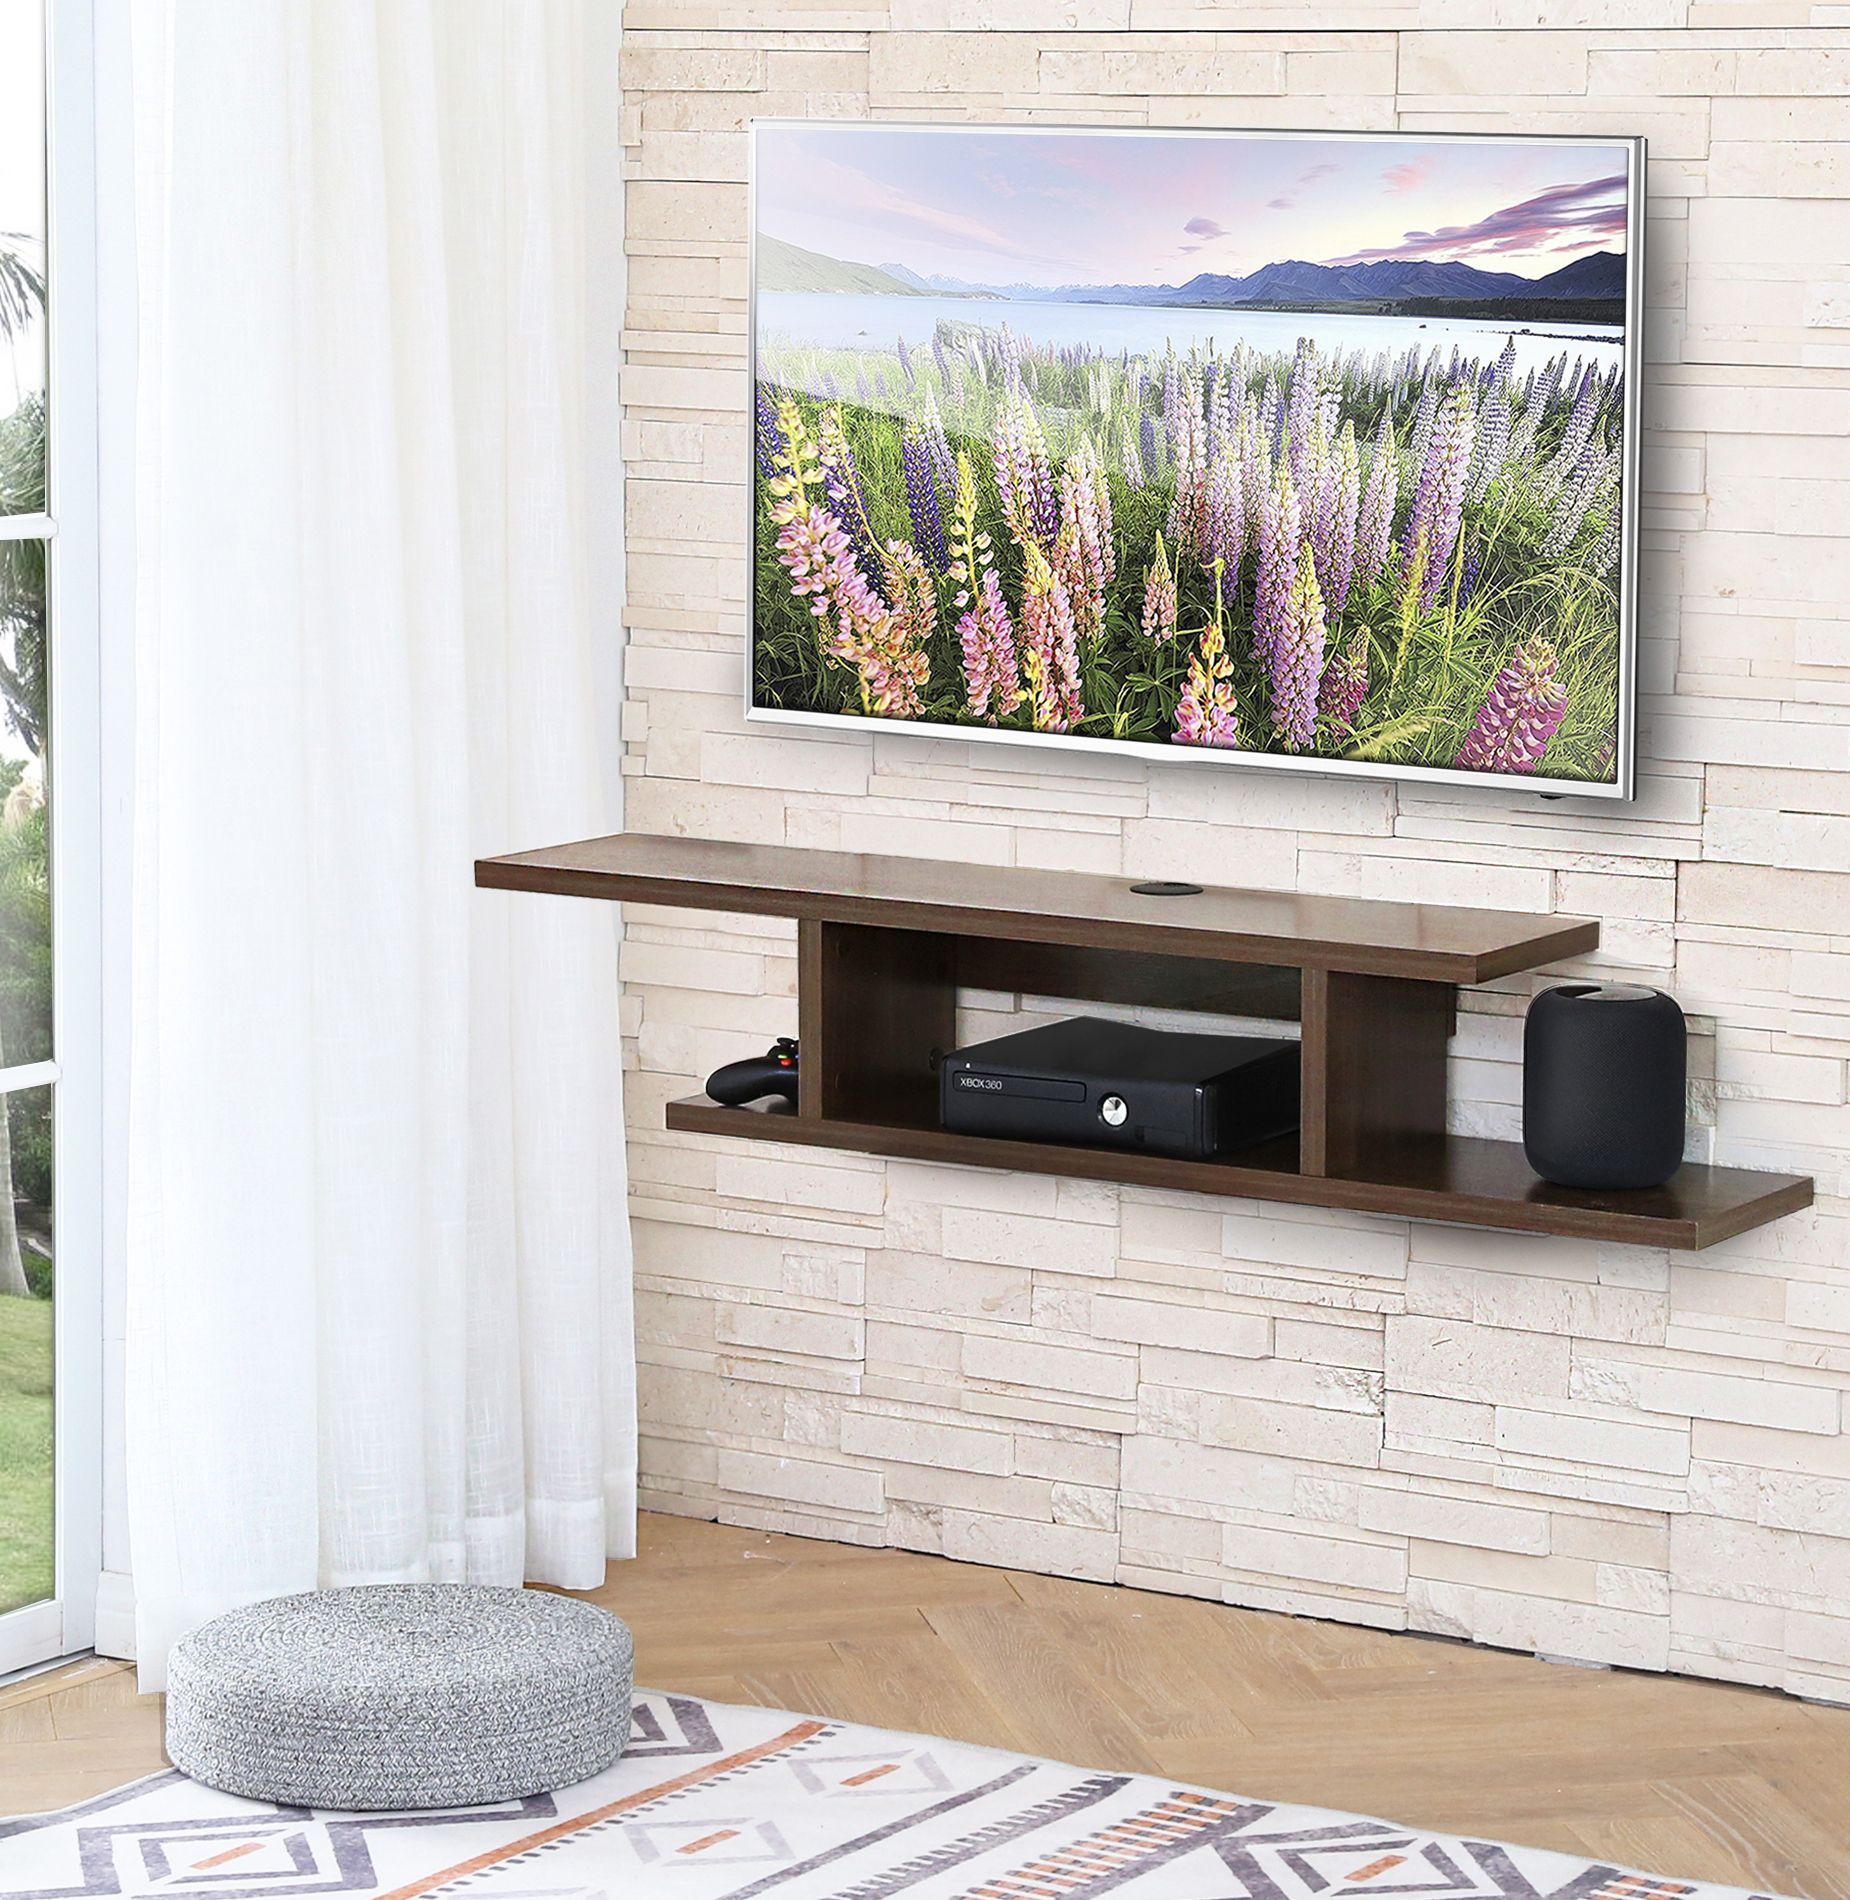 Fitueyes Floating Wall Mounted Tv Console Storage Shelf In Console Under Wall Mounted Tv (View 1 of 15)